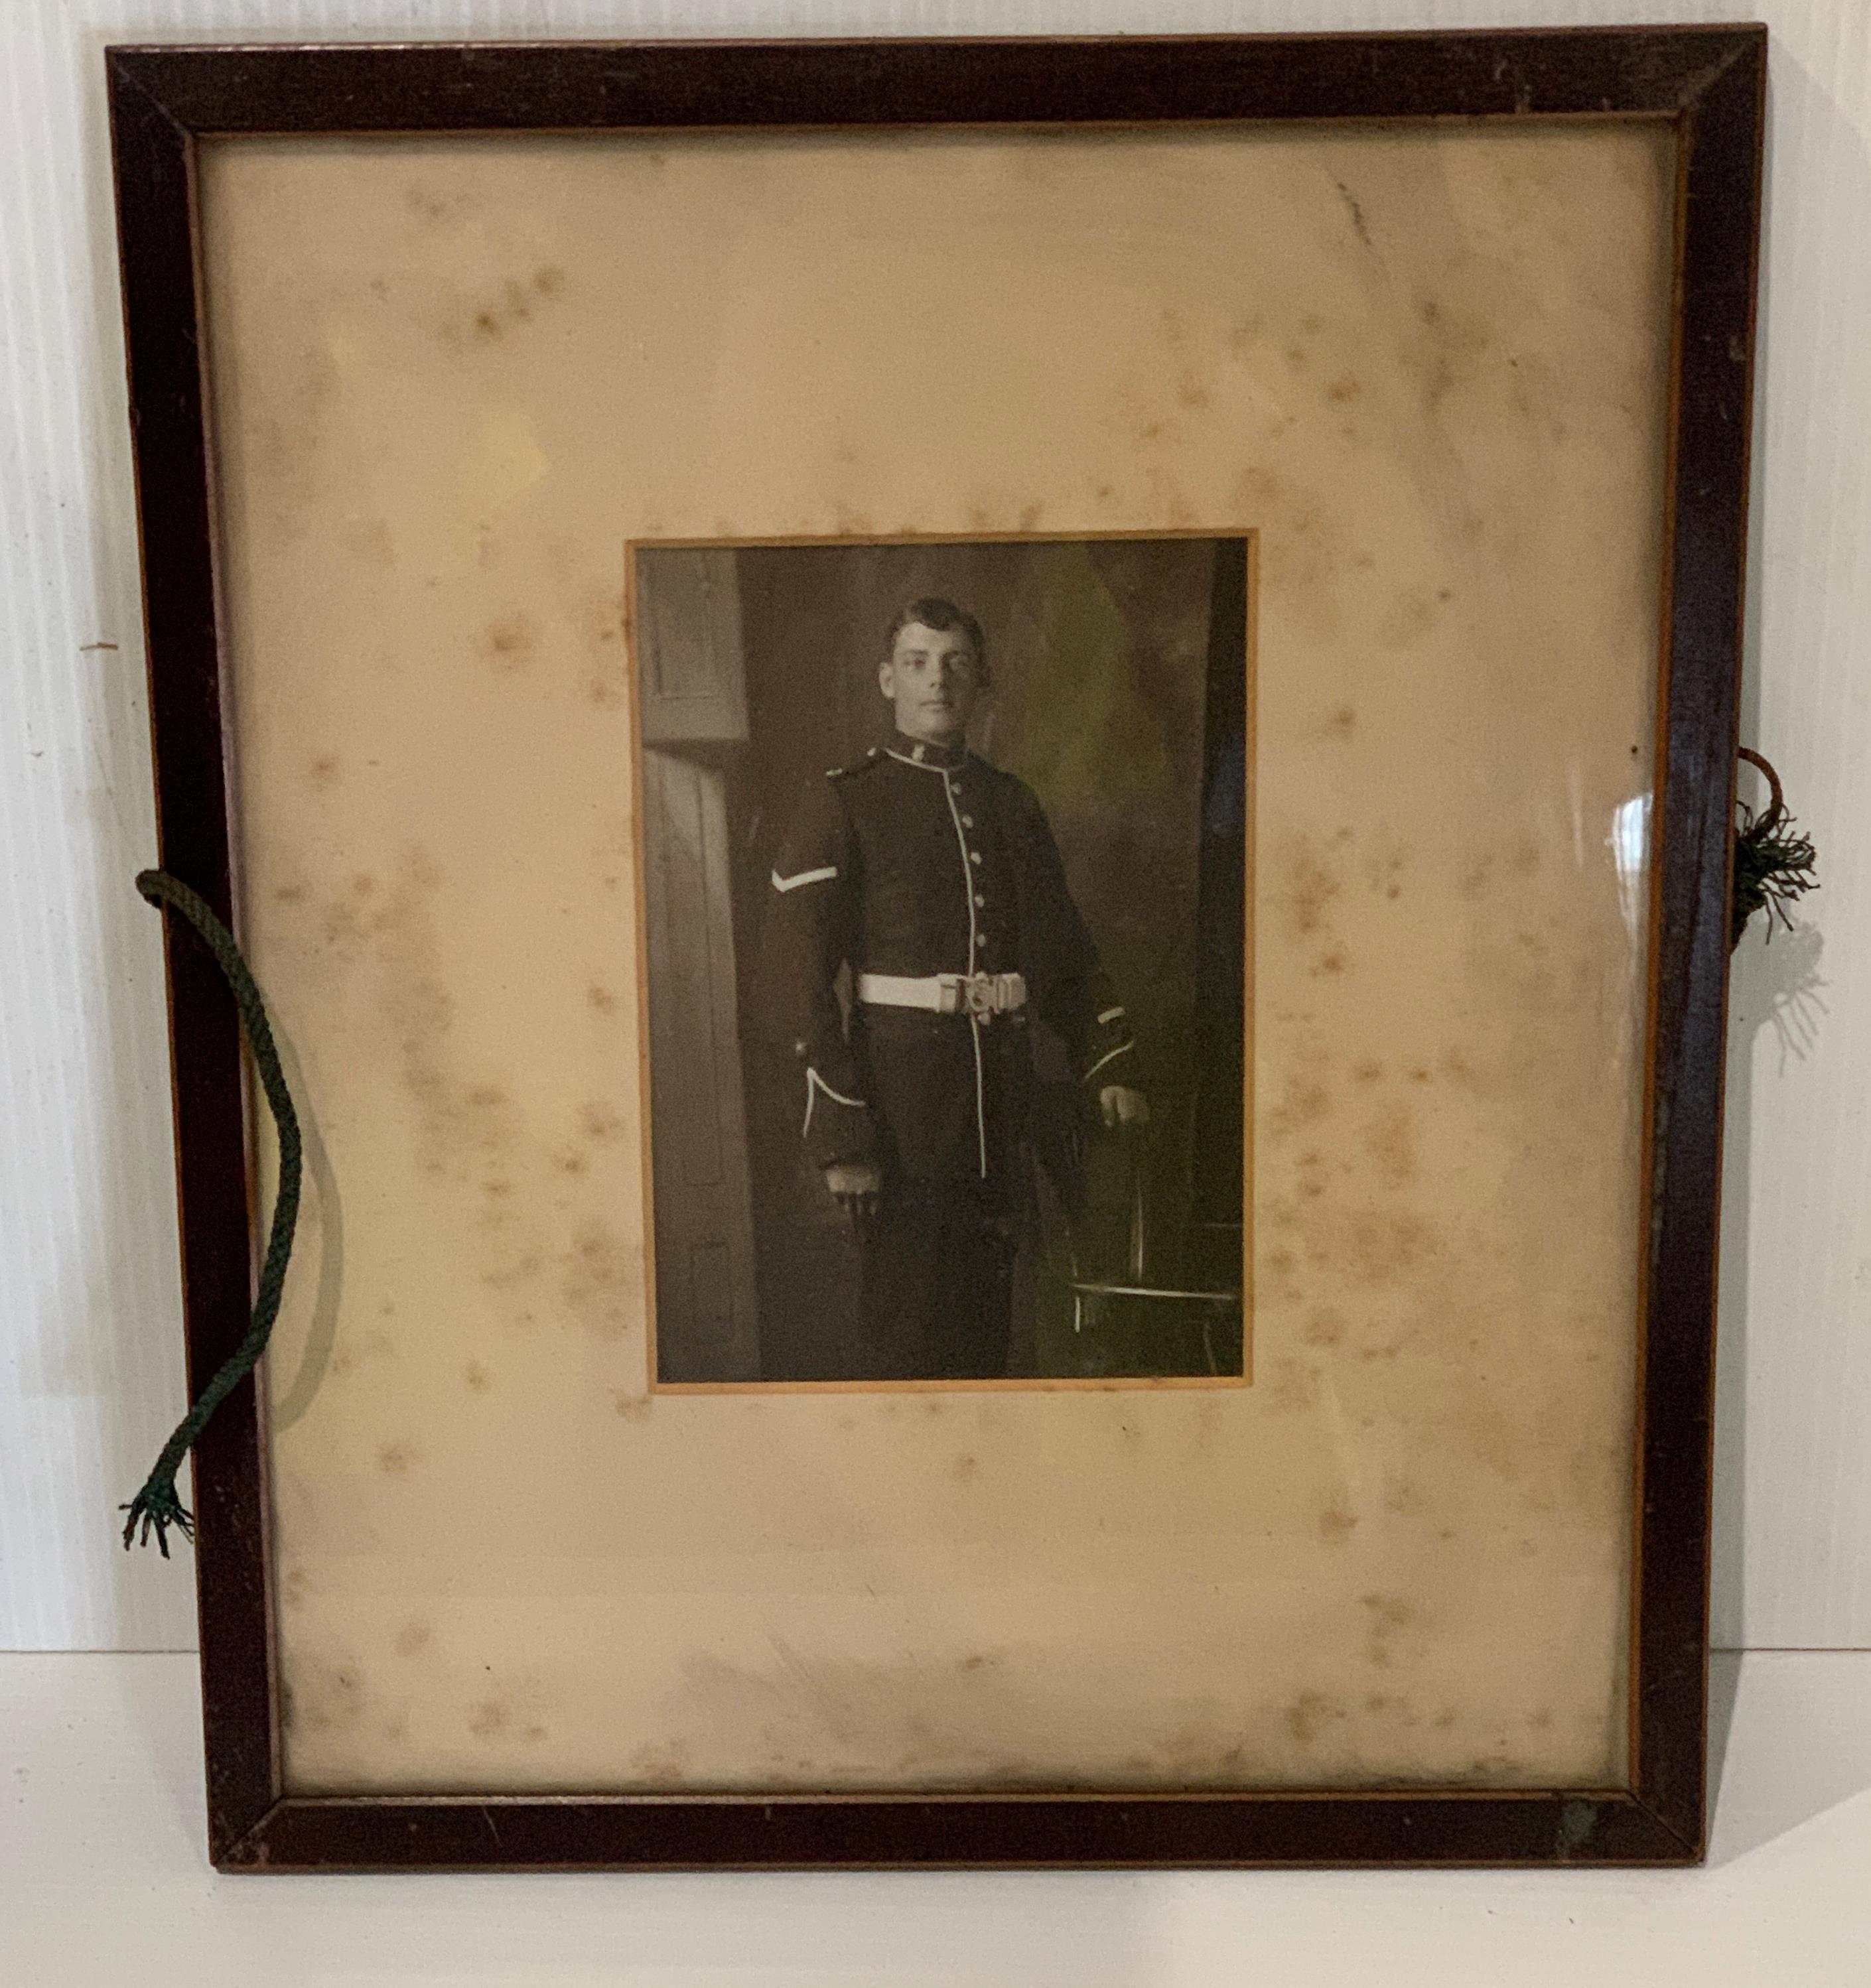 Ellery? small framed military sweetheart print 'some story' and two small framed photographs of a - Image 4 of 4